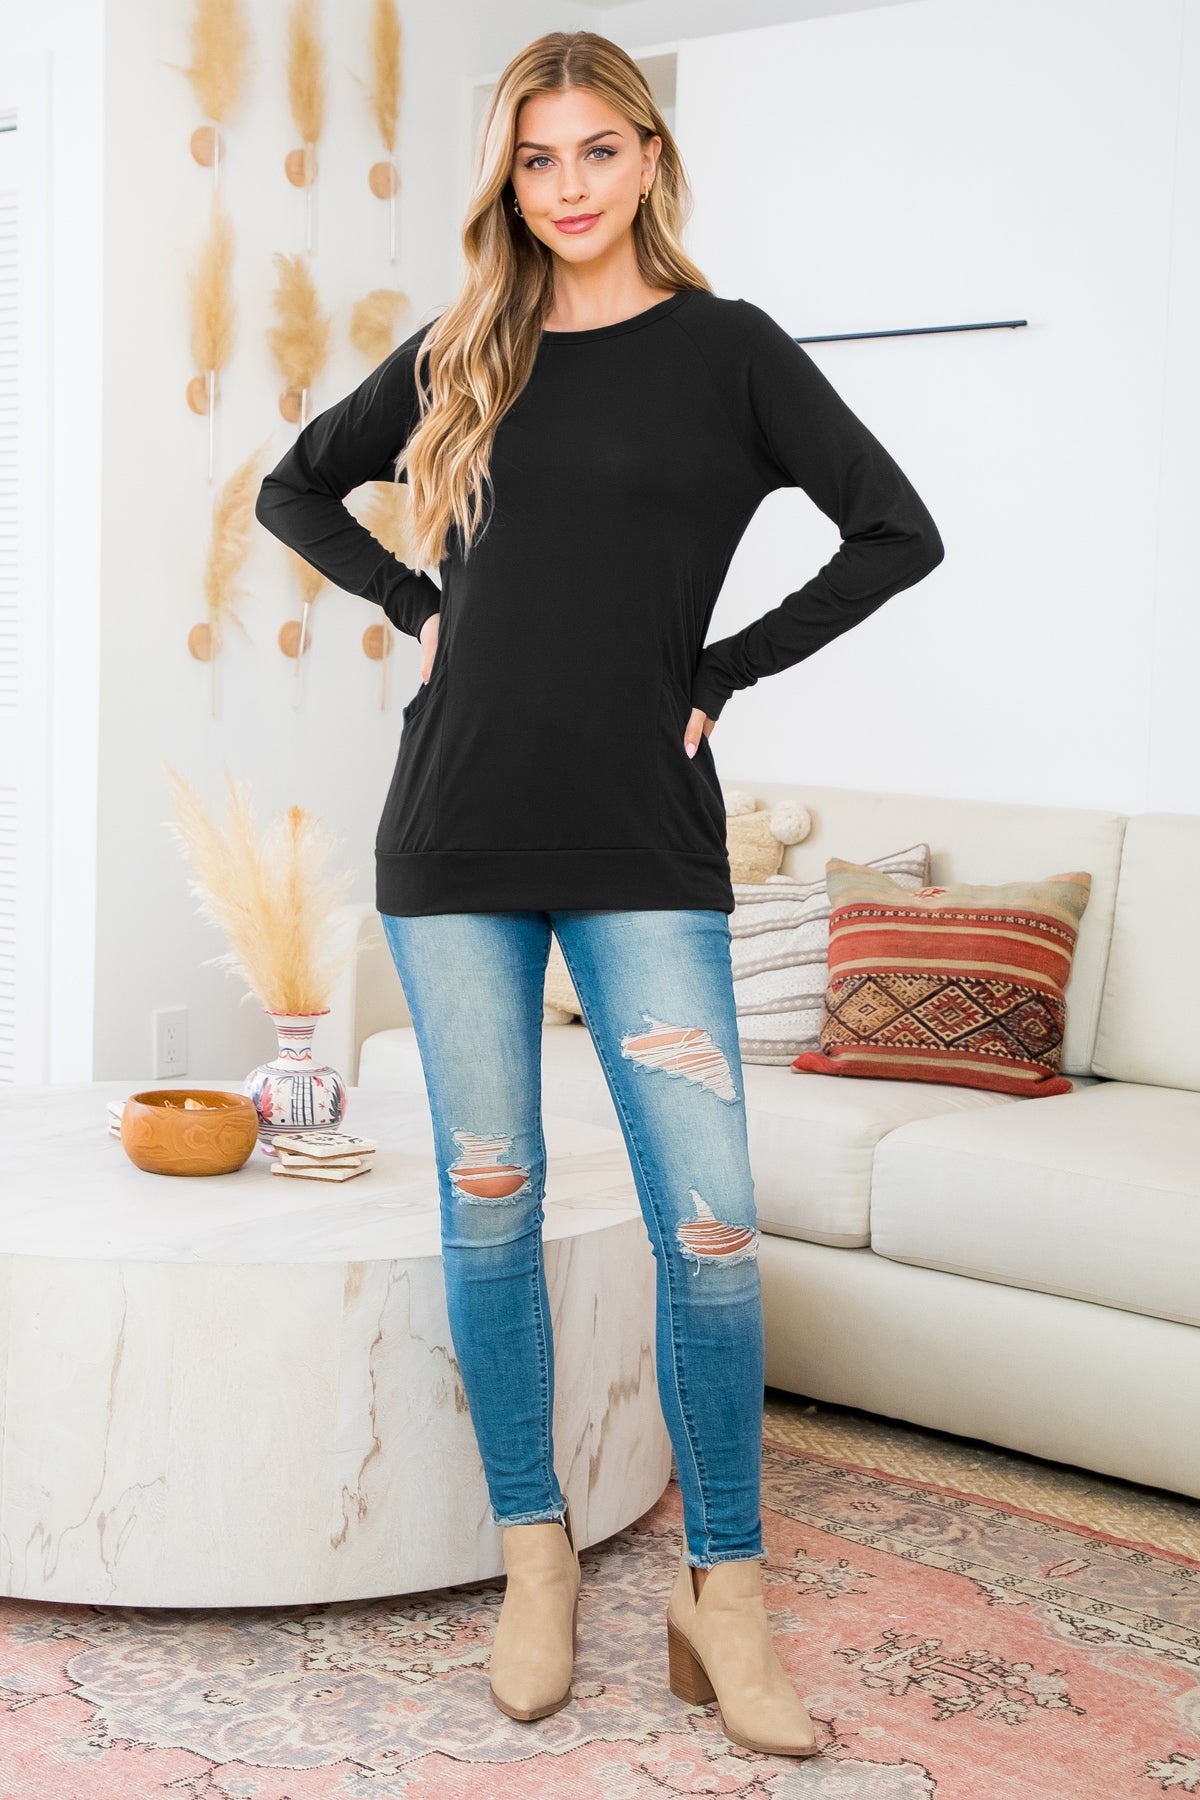 PLUS SIZE SOLID LONG SLEEVE FRONT POCKET TOP 3-2-1